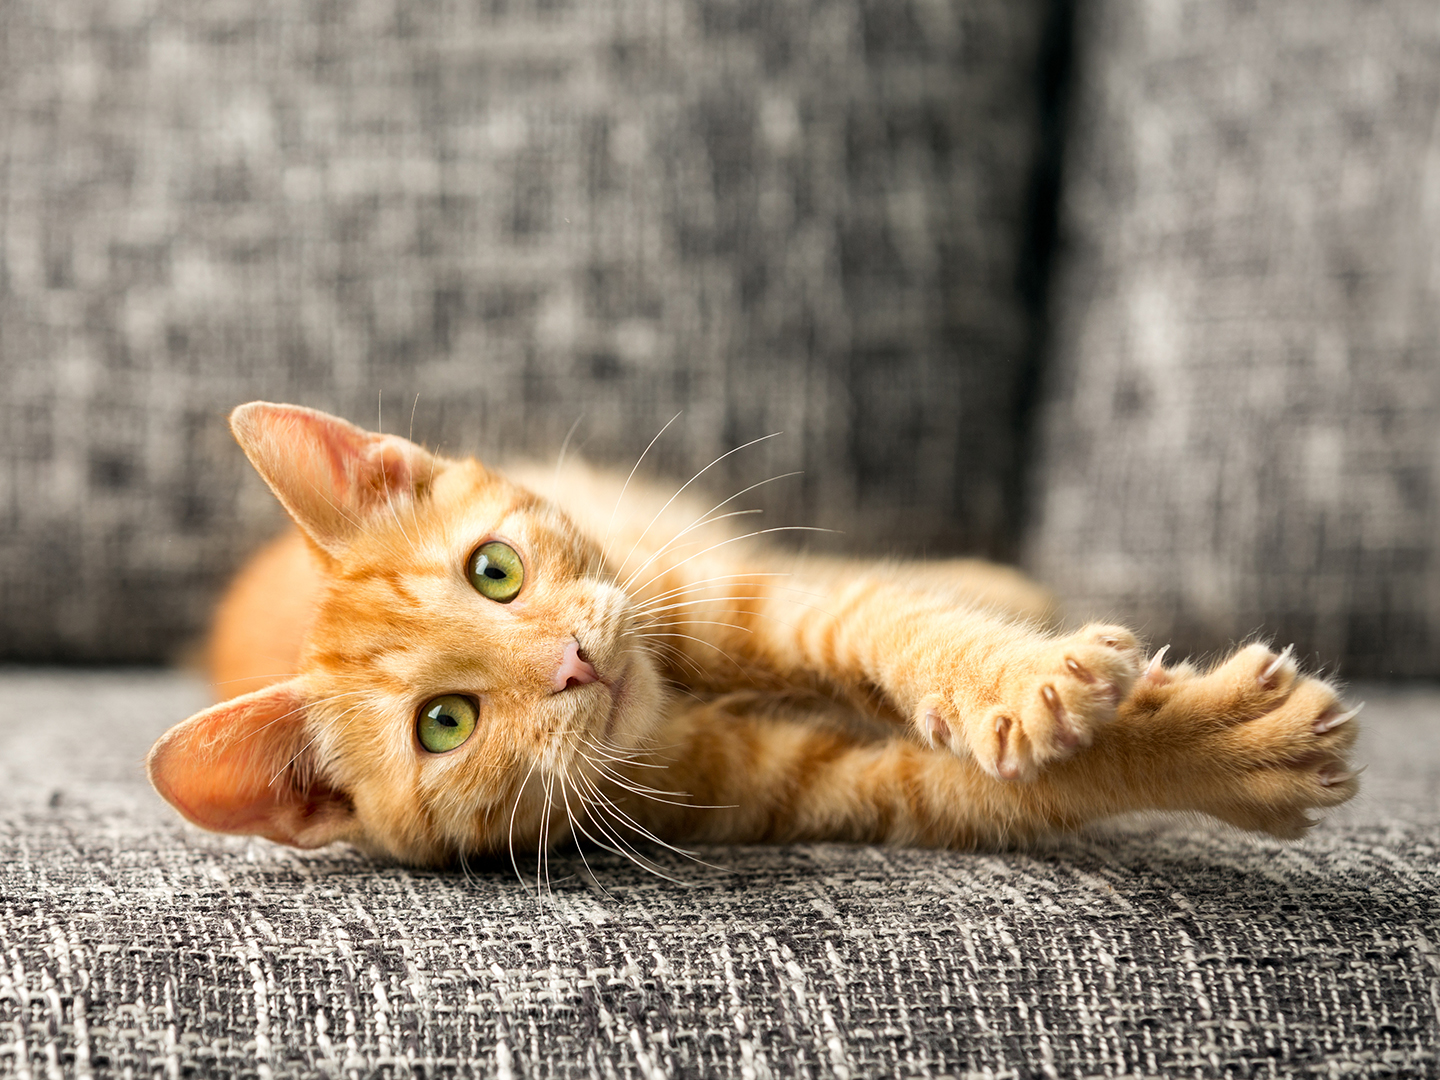 Wobbly Cat Syndrome: An Interesting But Harmless Condition